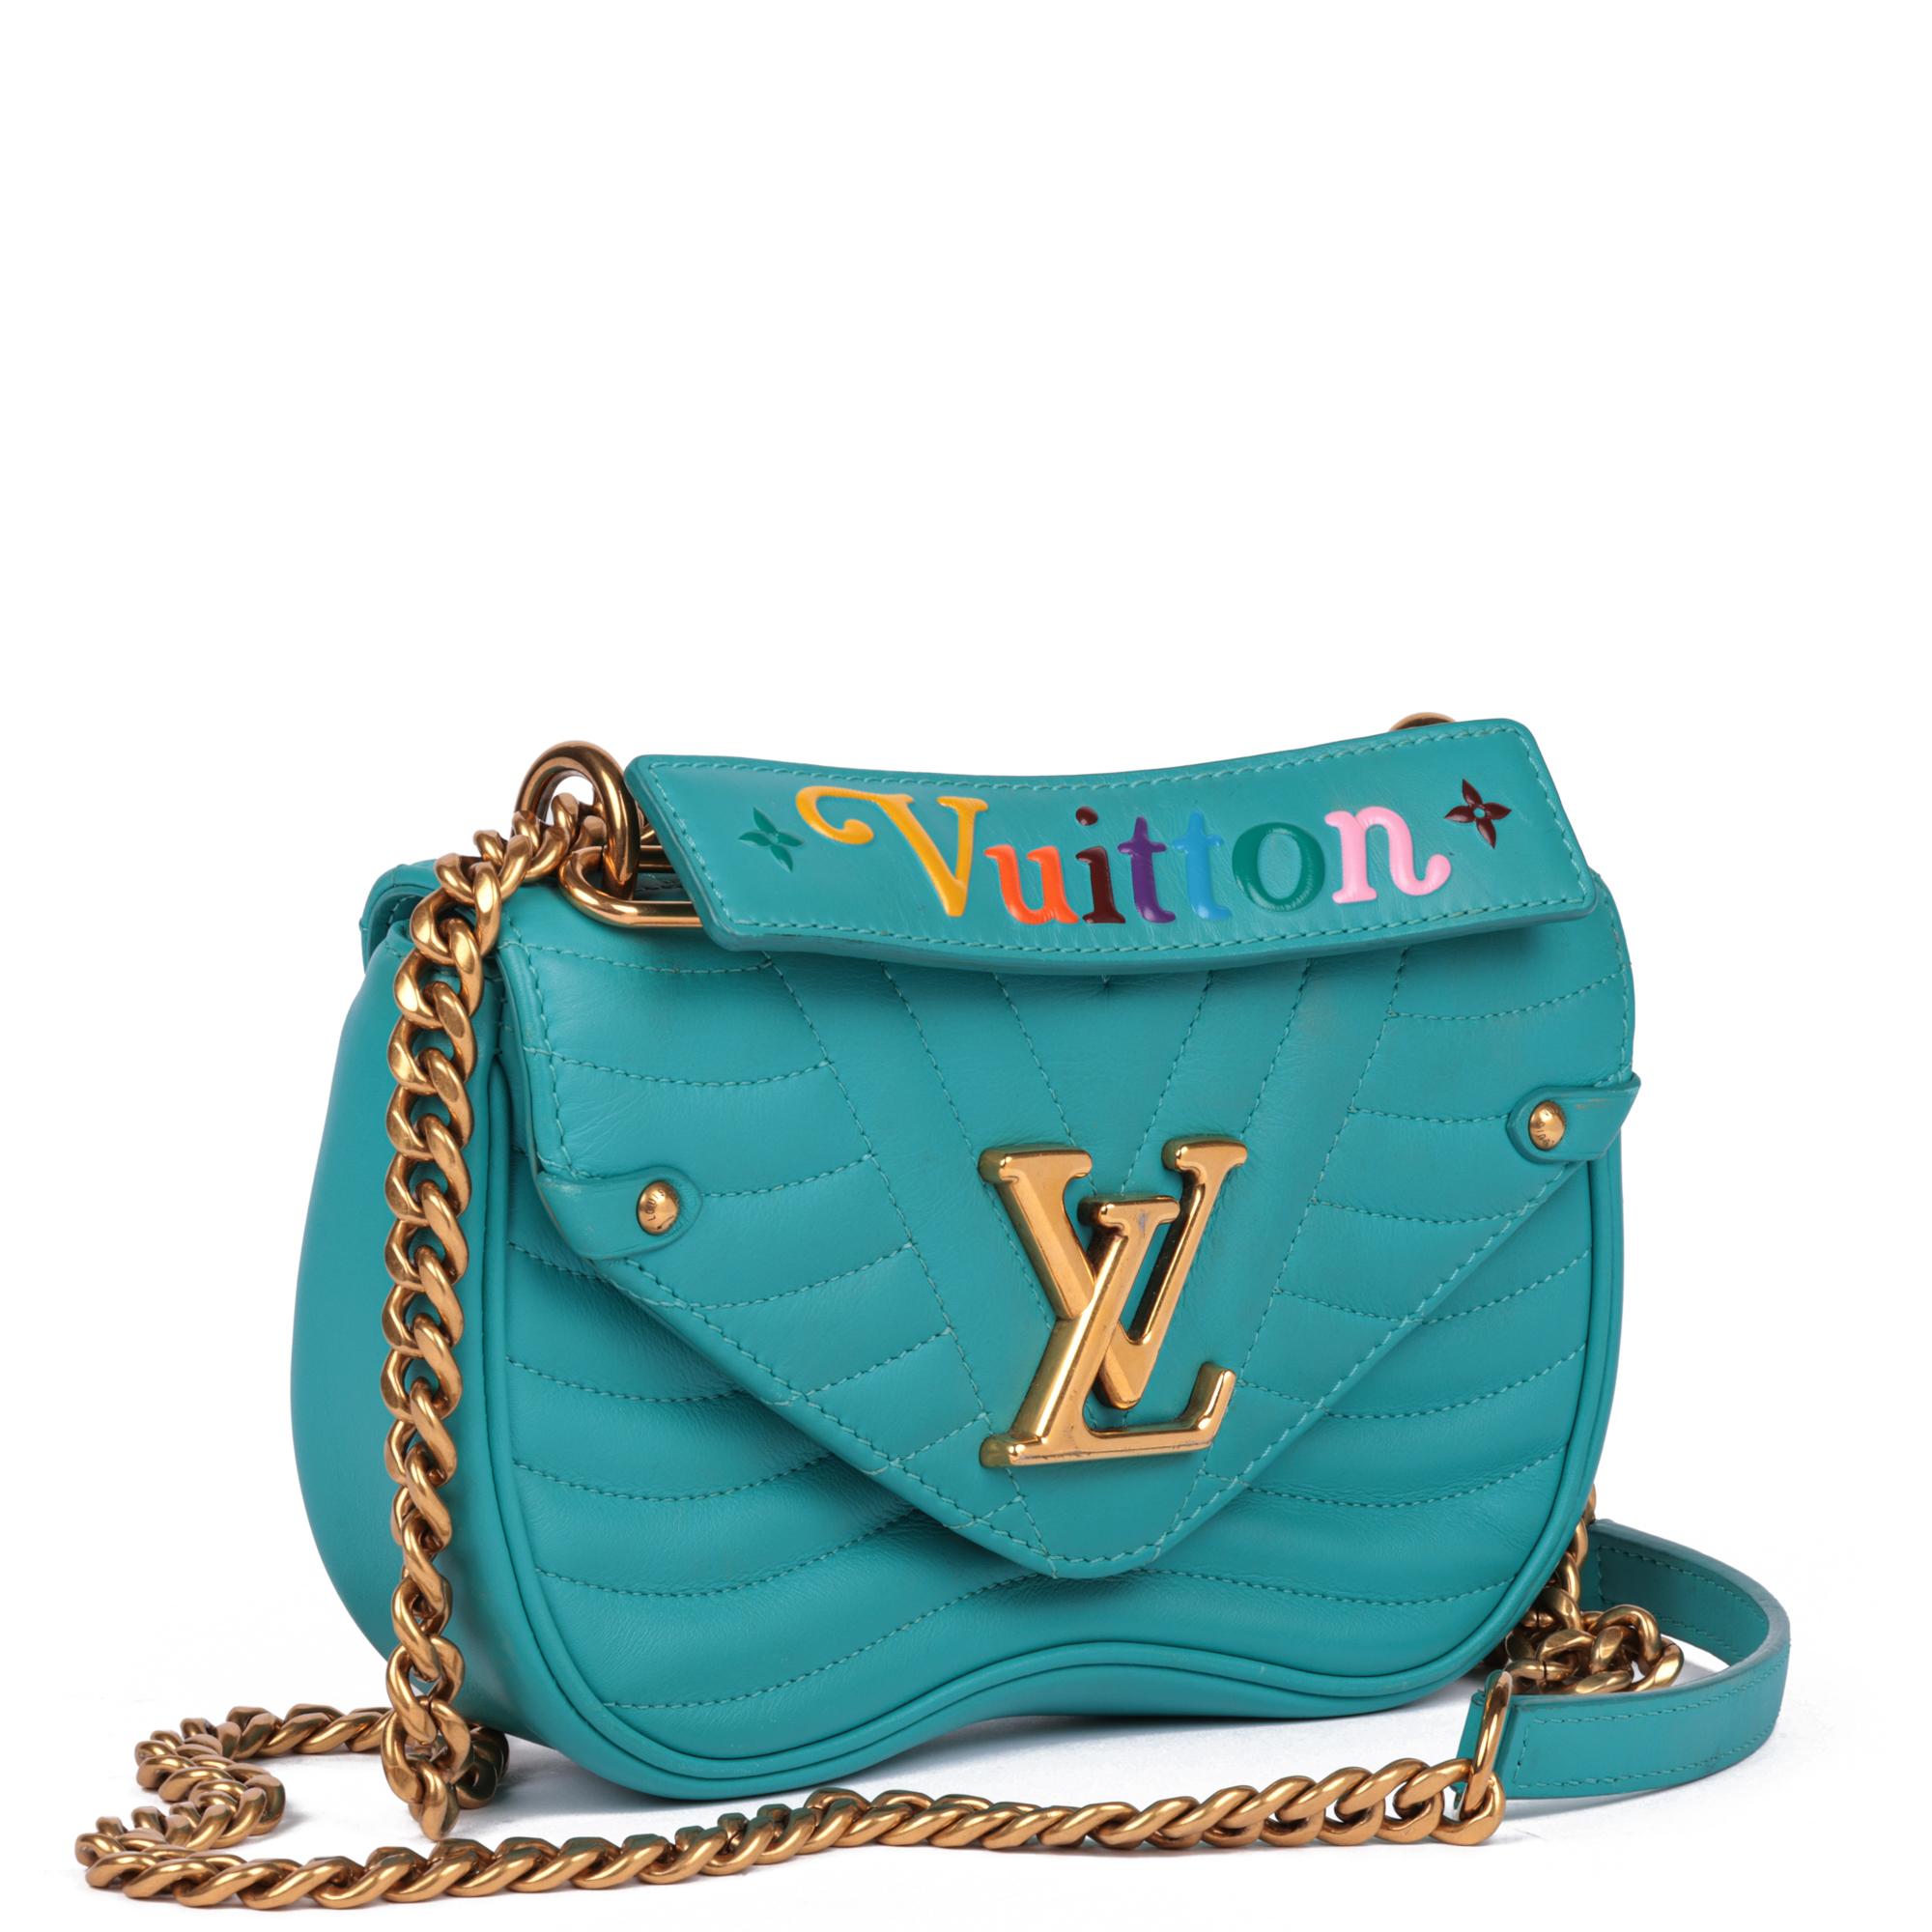 LOUIS VUITTON
Malibu Green Quilted Calfskin Leather New Wave Chain PM

Serial Number: NZ3108
Age (Circa): 2018
Authenticity Details: Date Stamp (Made in Italy) 
Gender: Ladies
Type: Shoulder, Crossbody, Top Handle

Colour: Malibu Green
Hardware: